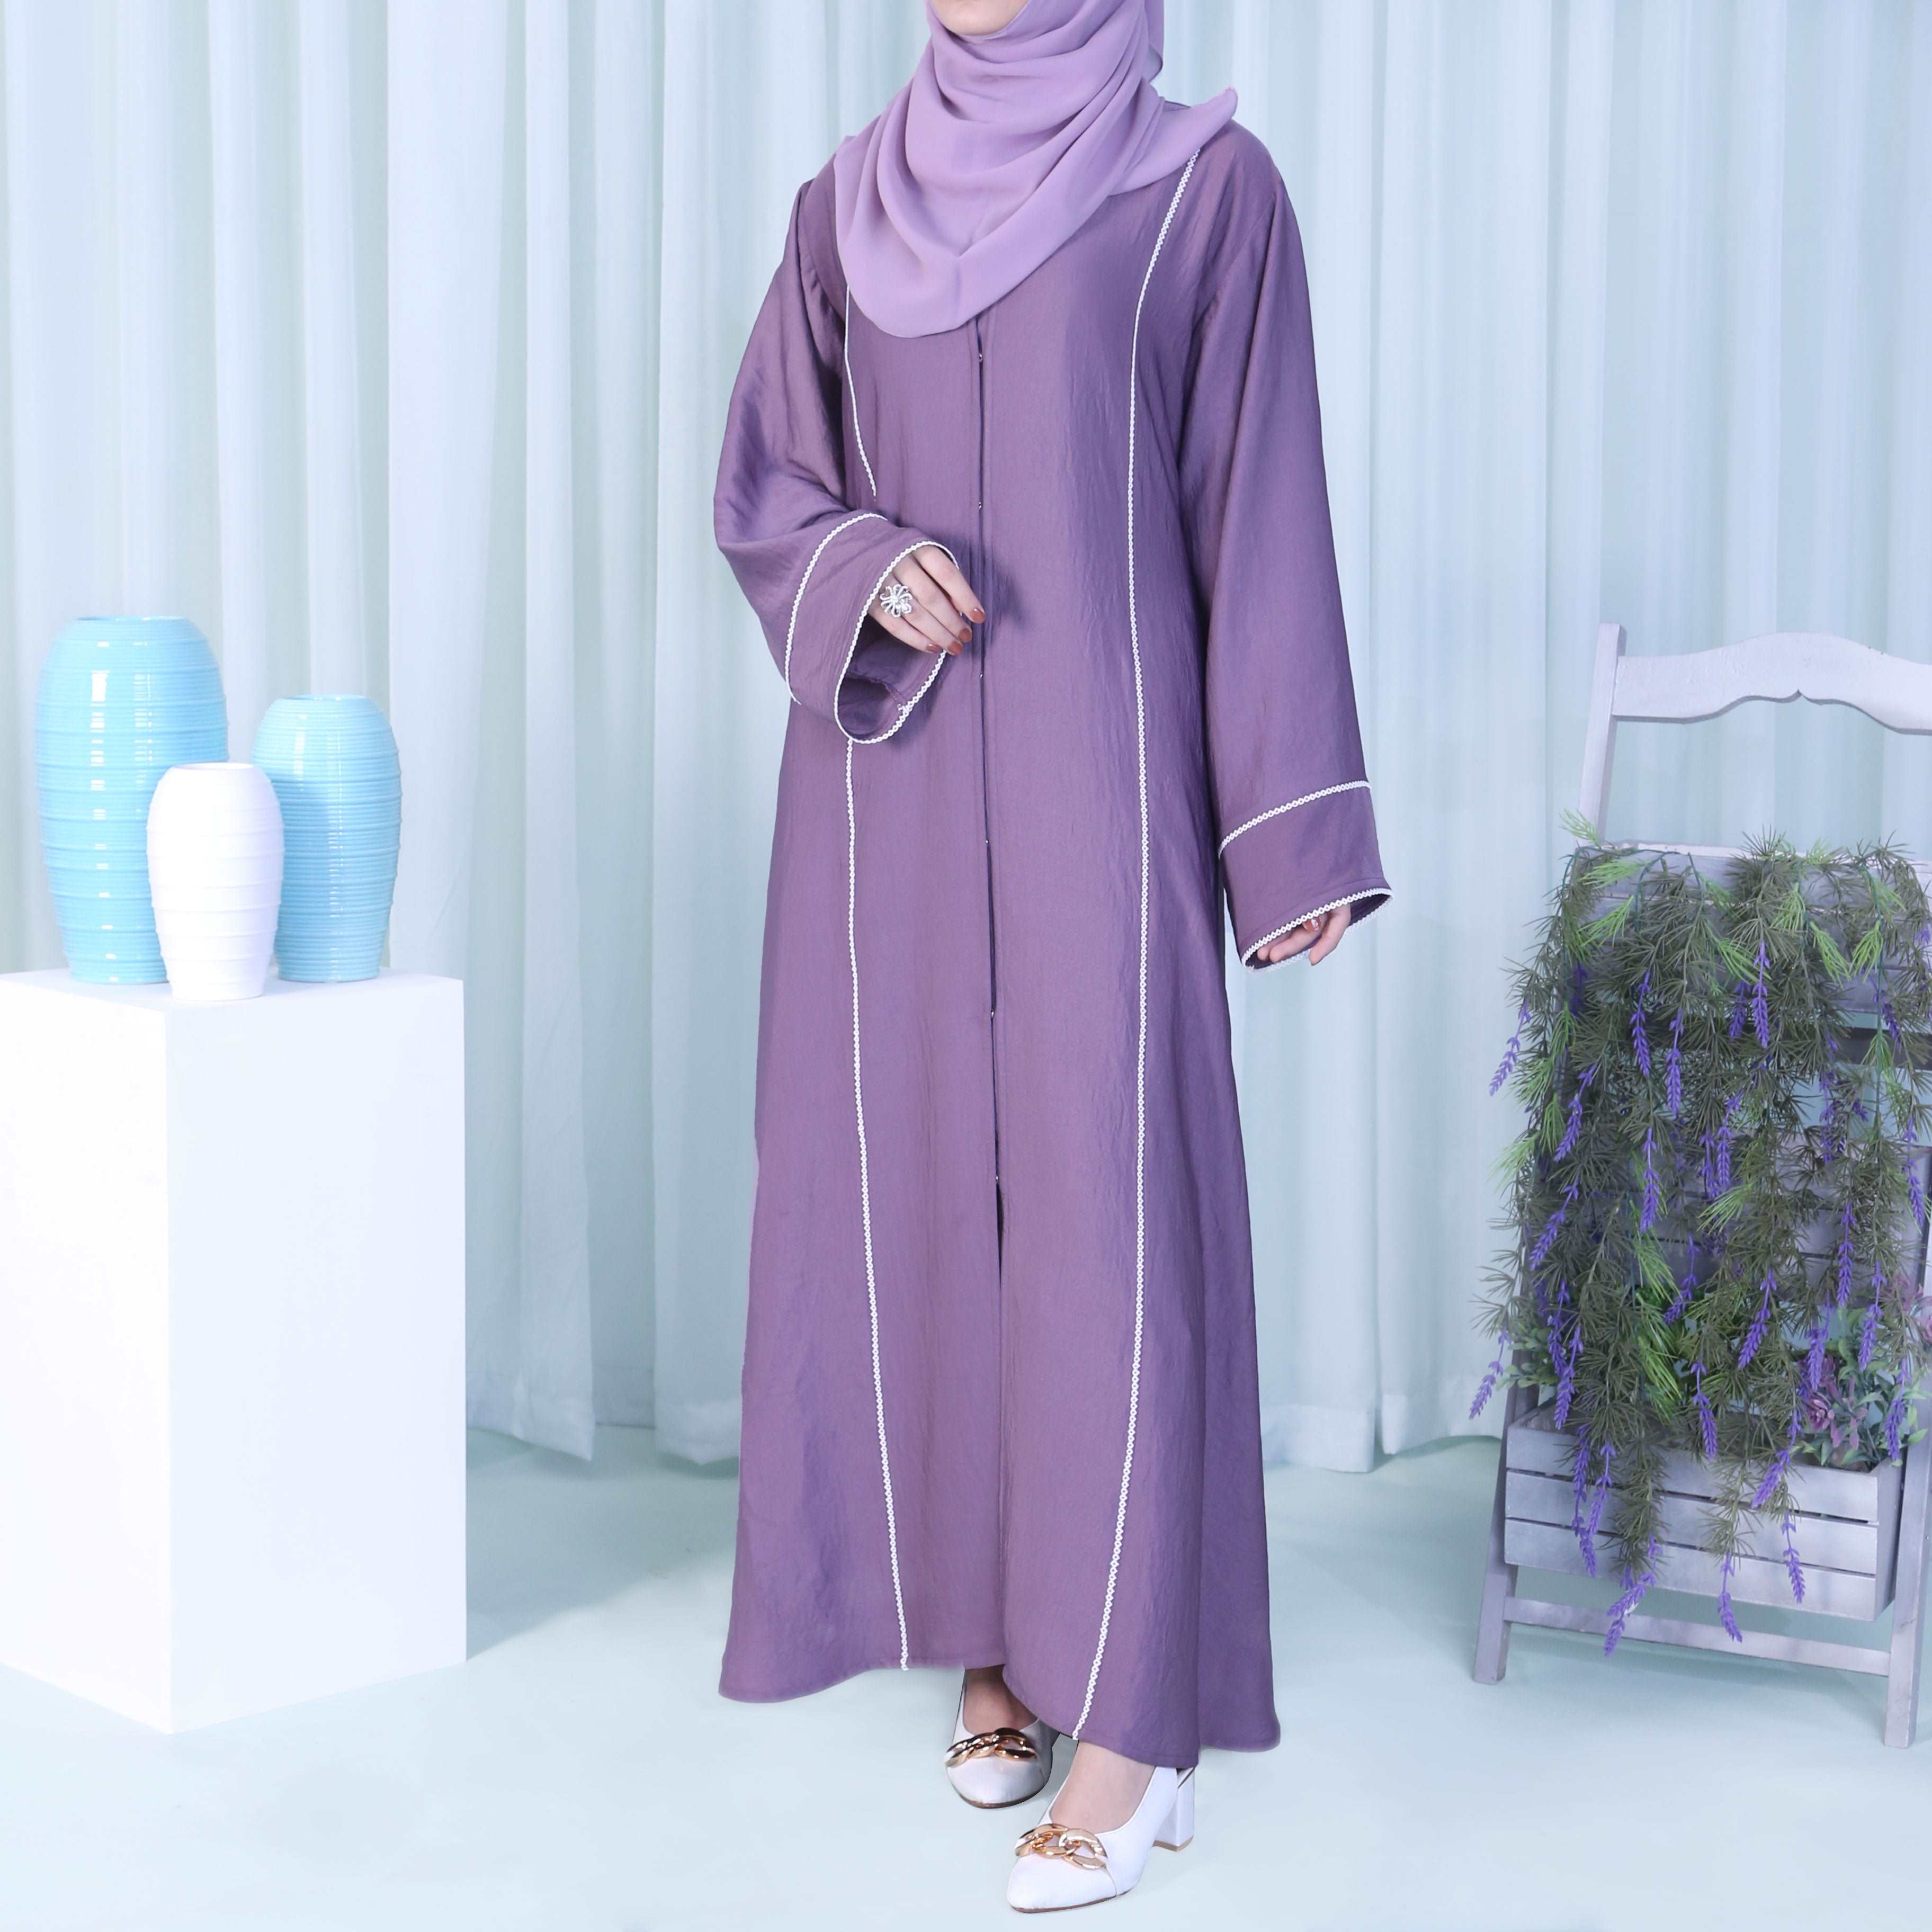 ABAYA WITH LACE.RB729(723)